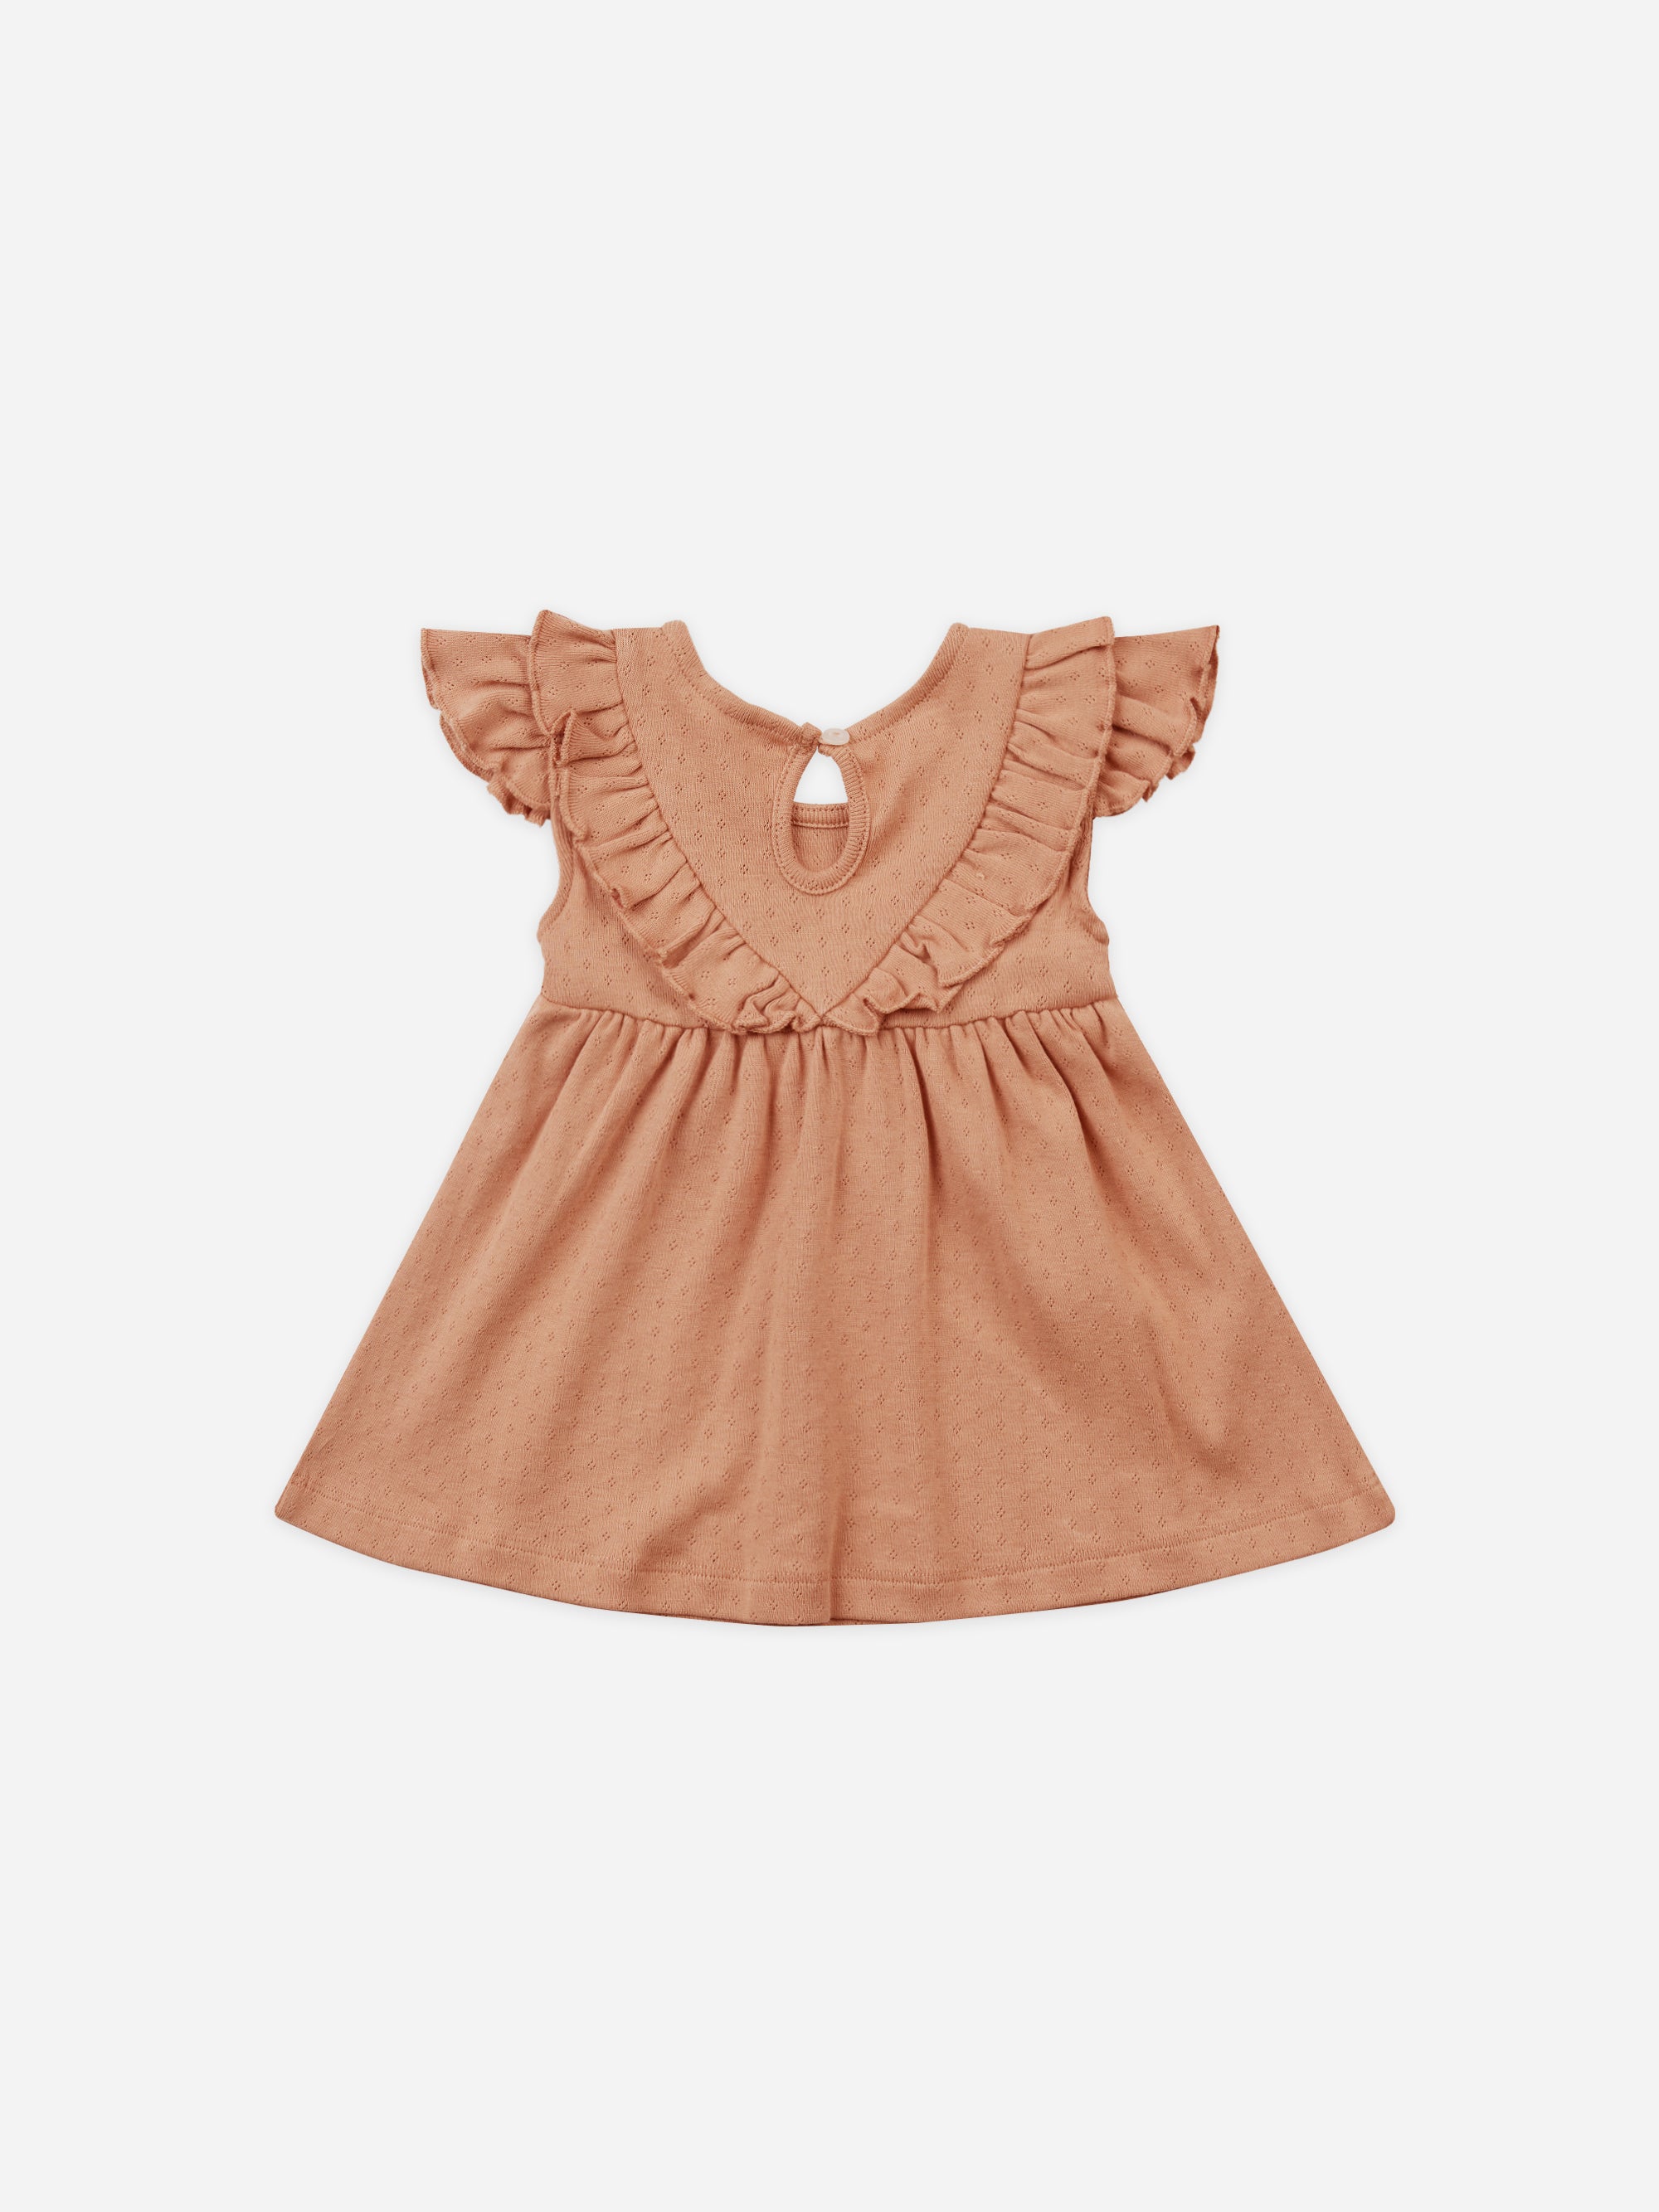 Sleeveless Ruffle V Dress || Melon - Rylee + Cru | Kids Clothes | Trendy Baby Clothes | Modern Infant Outfits |